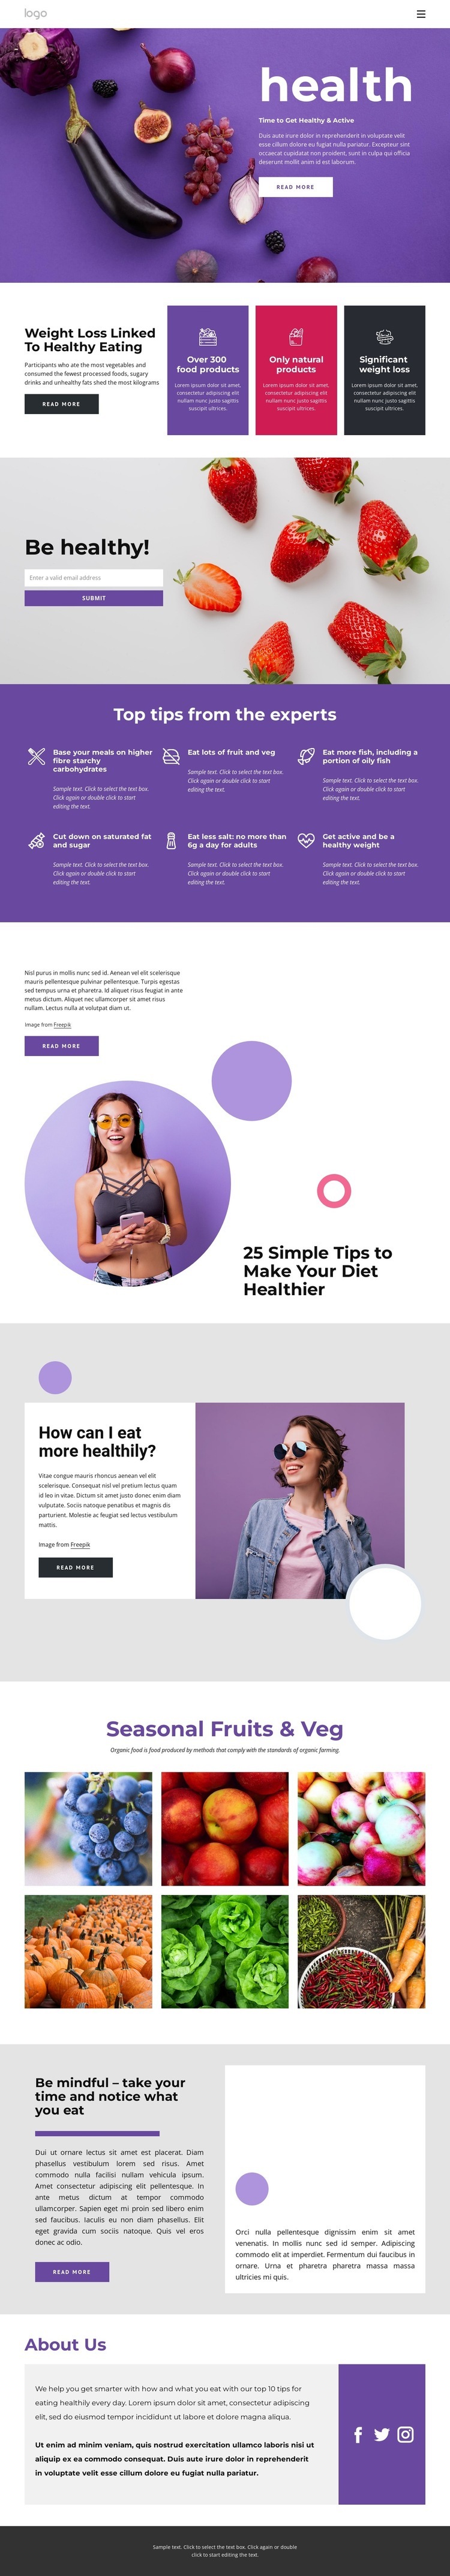 Building a healthy and balanced diet Web Page Designer